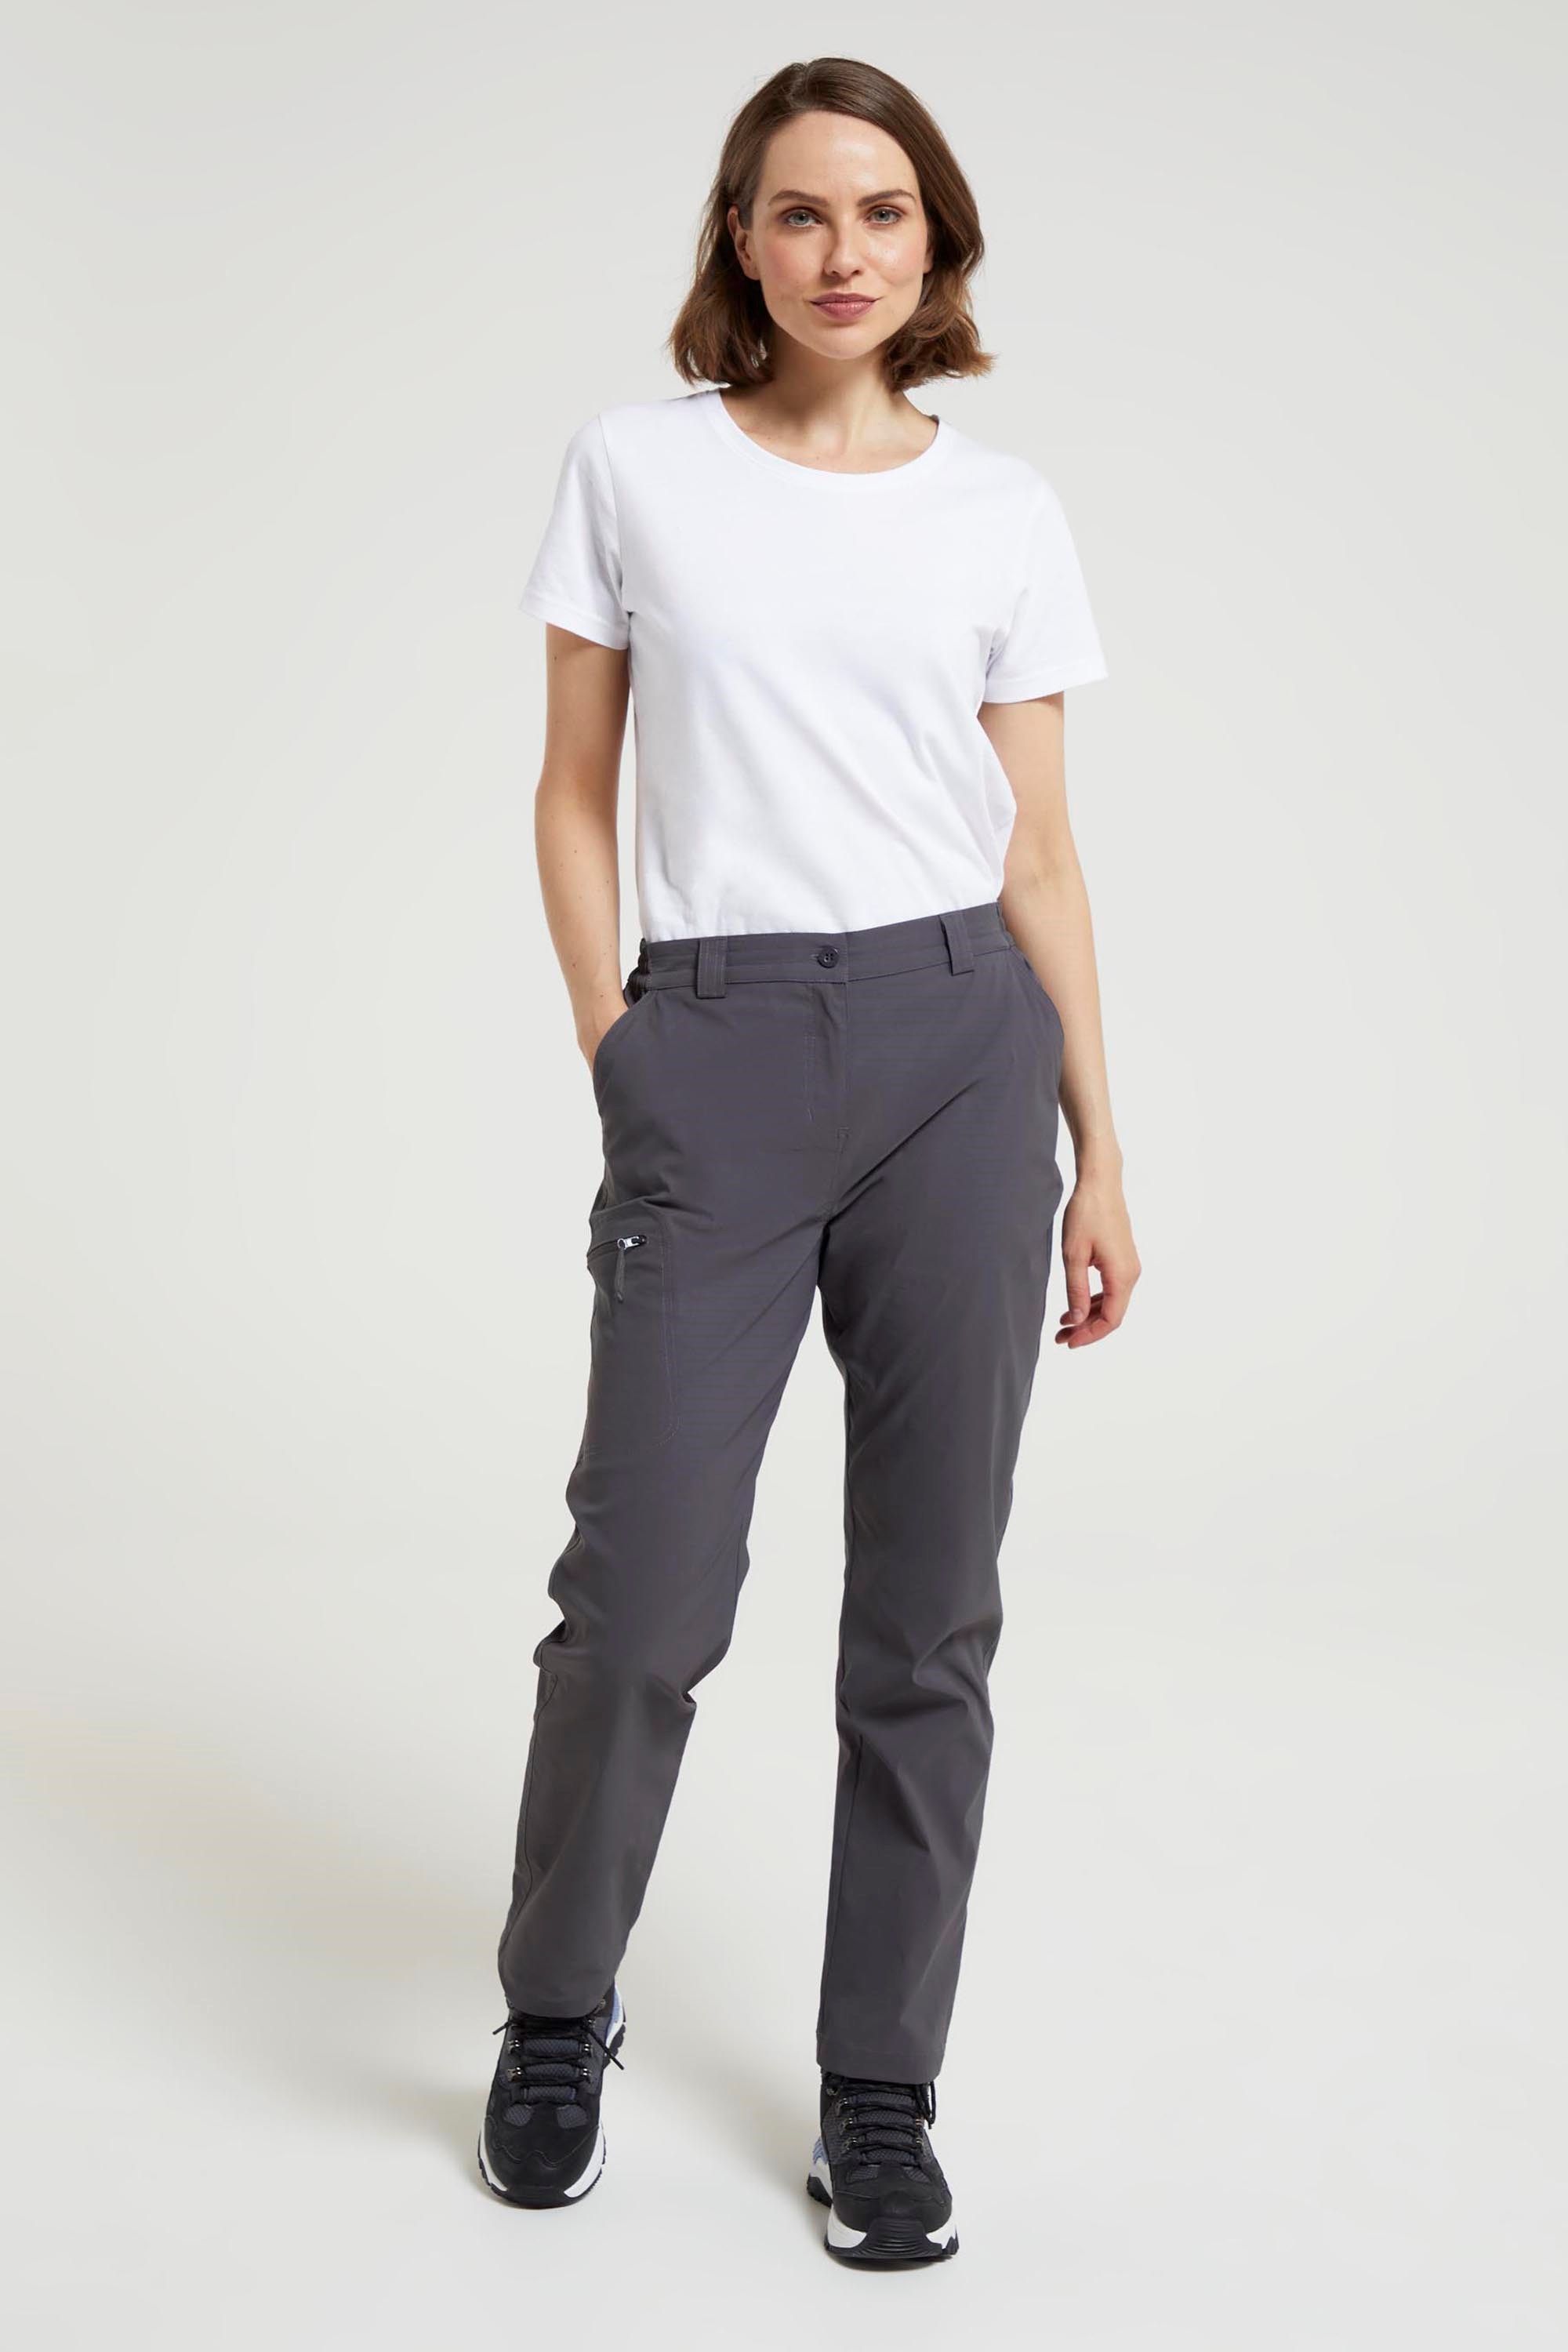 Women's Service Workpants with Stretch - 2316